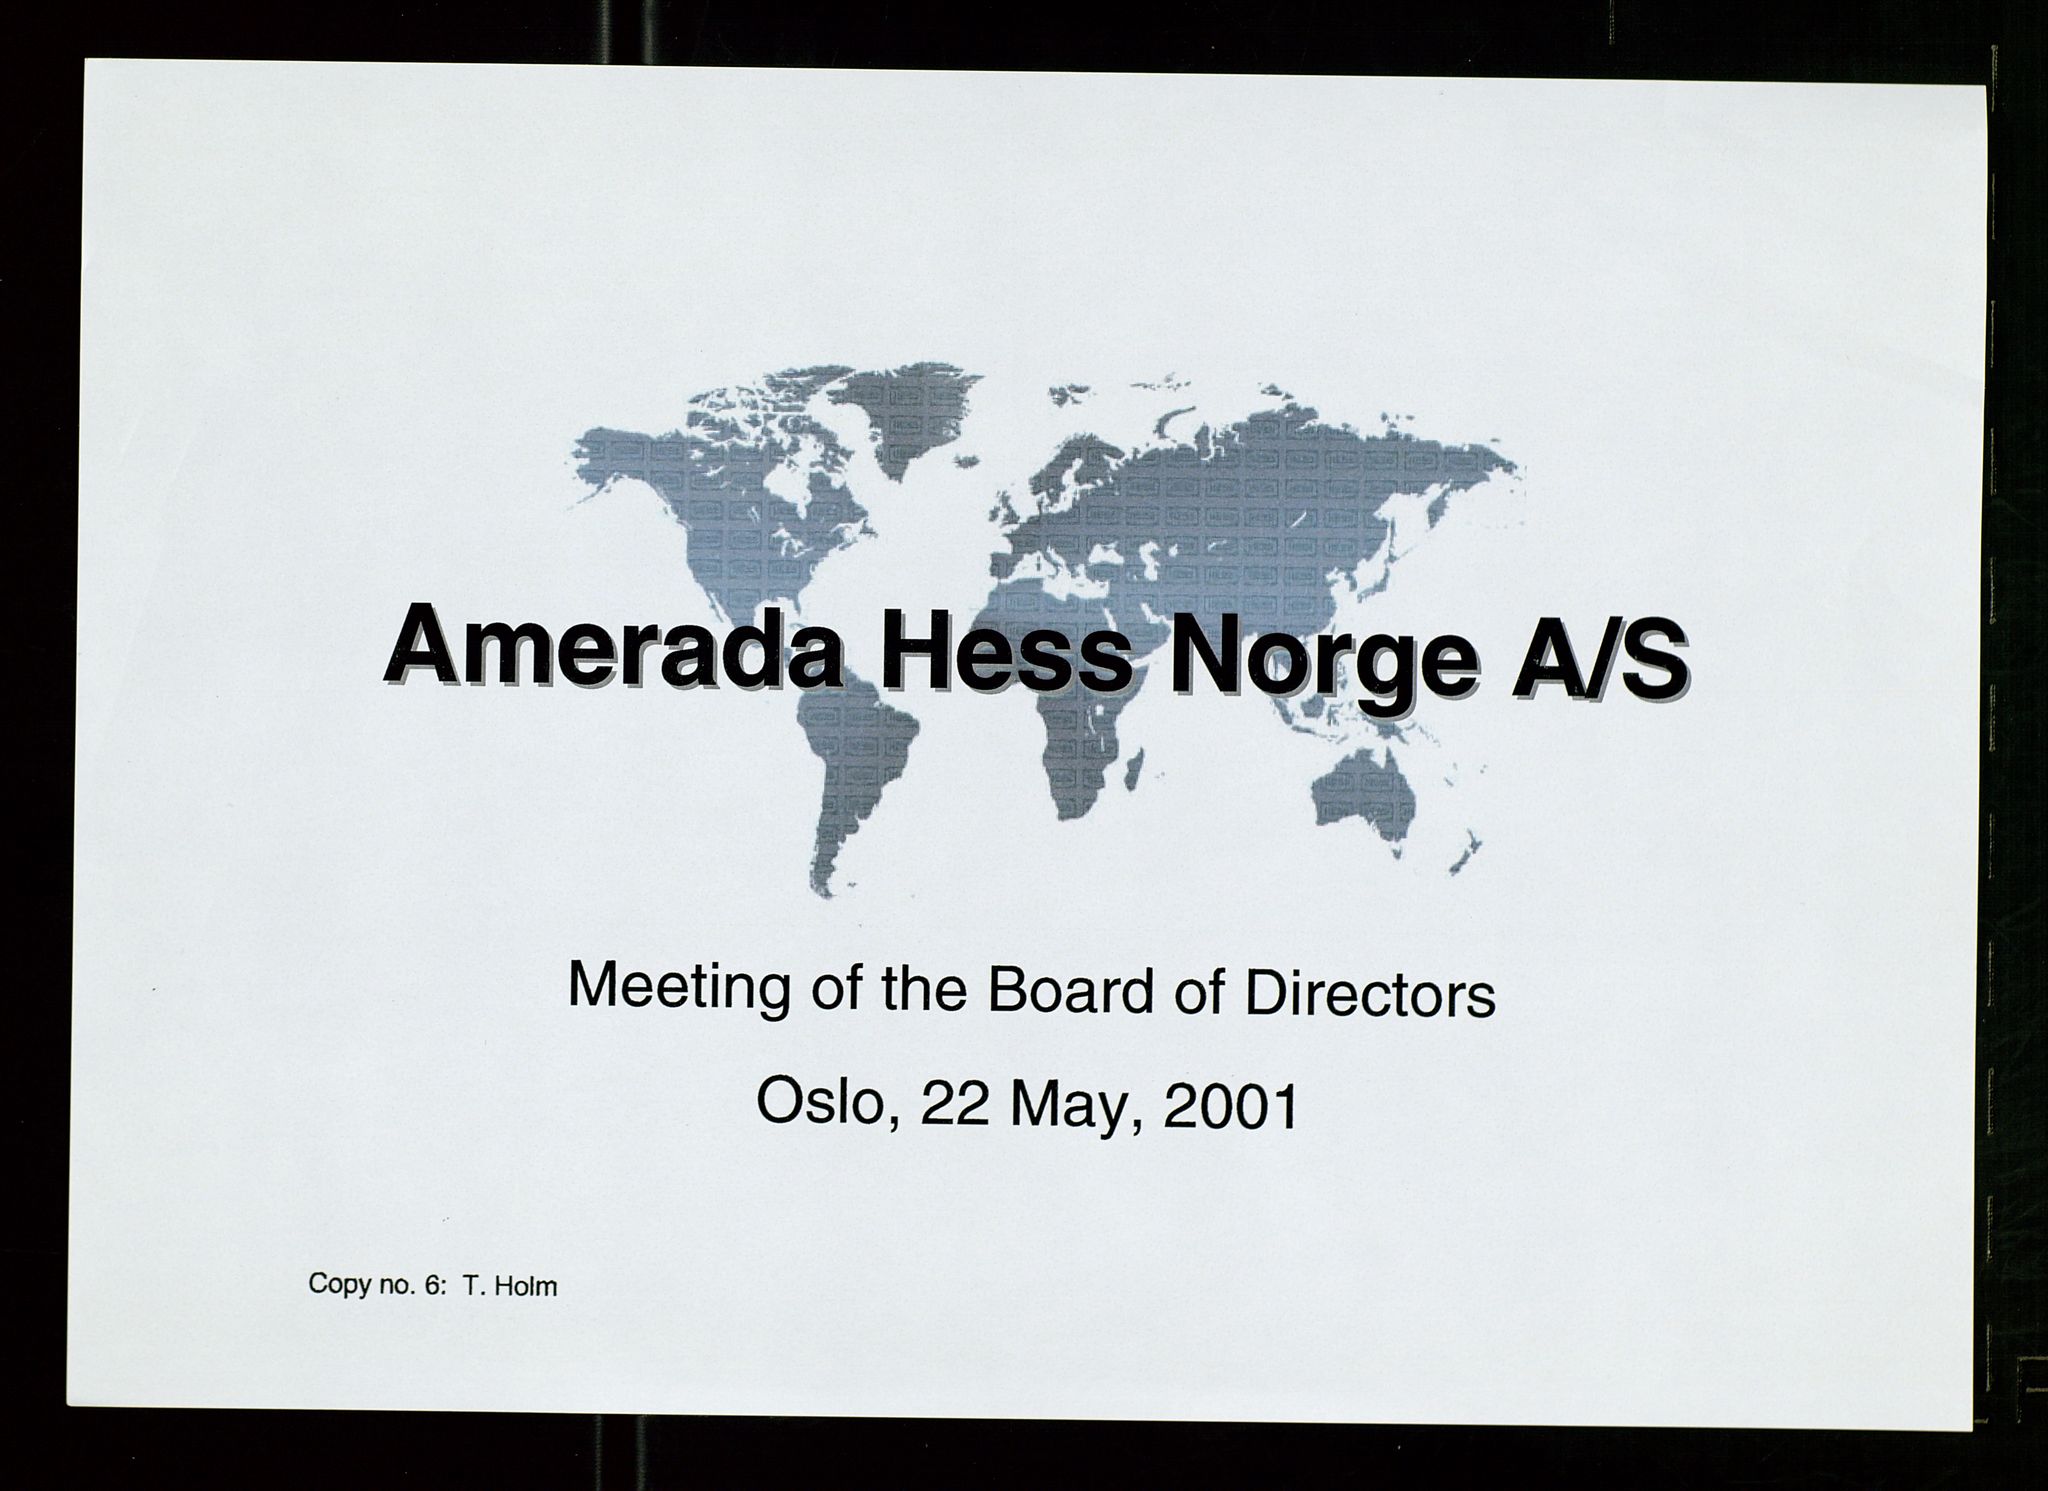 Pa 1766 - Hess Norge AS, SAST/A-102451/A/Aa/L0004: Referater og sakspapirer, 1999-2002, p. 72